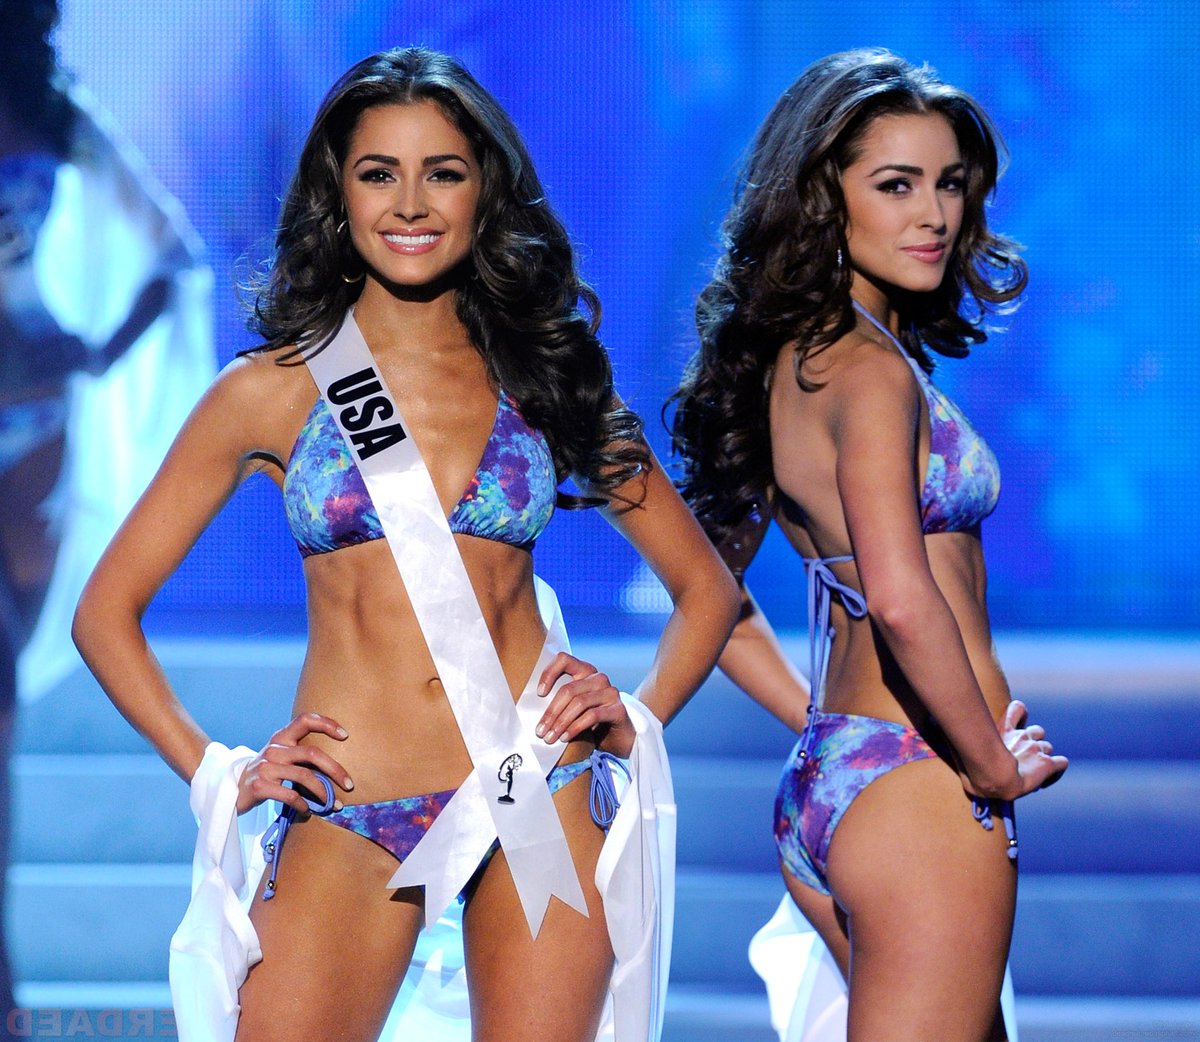 Olivia Culpo Competes in The Miss Universe Pageant - December 19, 2012

Full size here: https://t.co/d9O6BUGhkg https://t.co/tywdUOIj4q